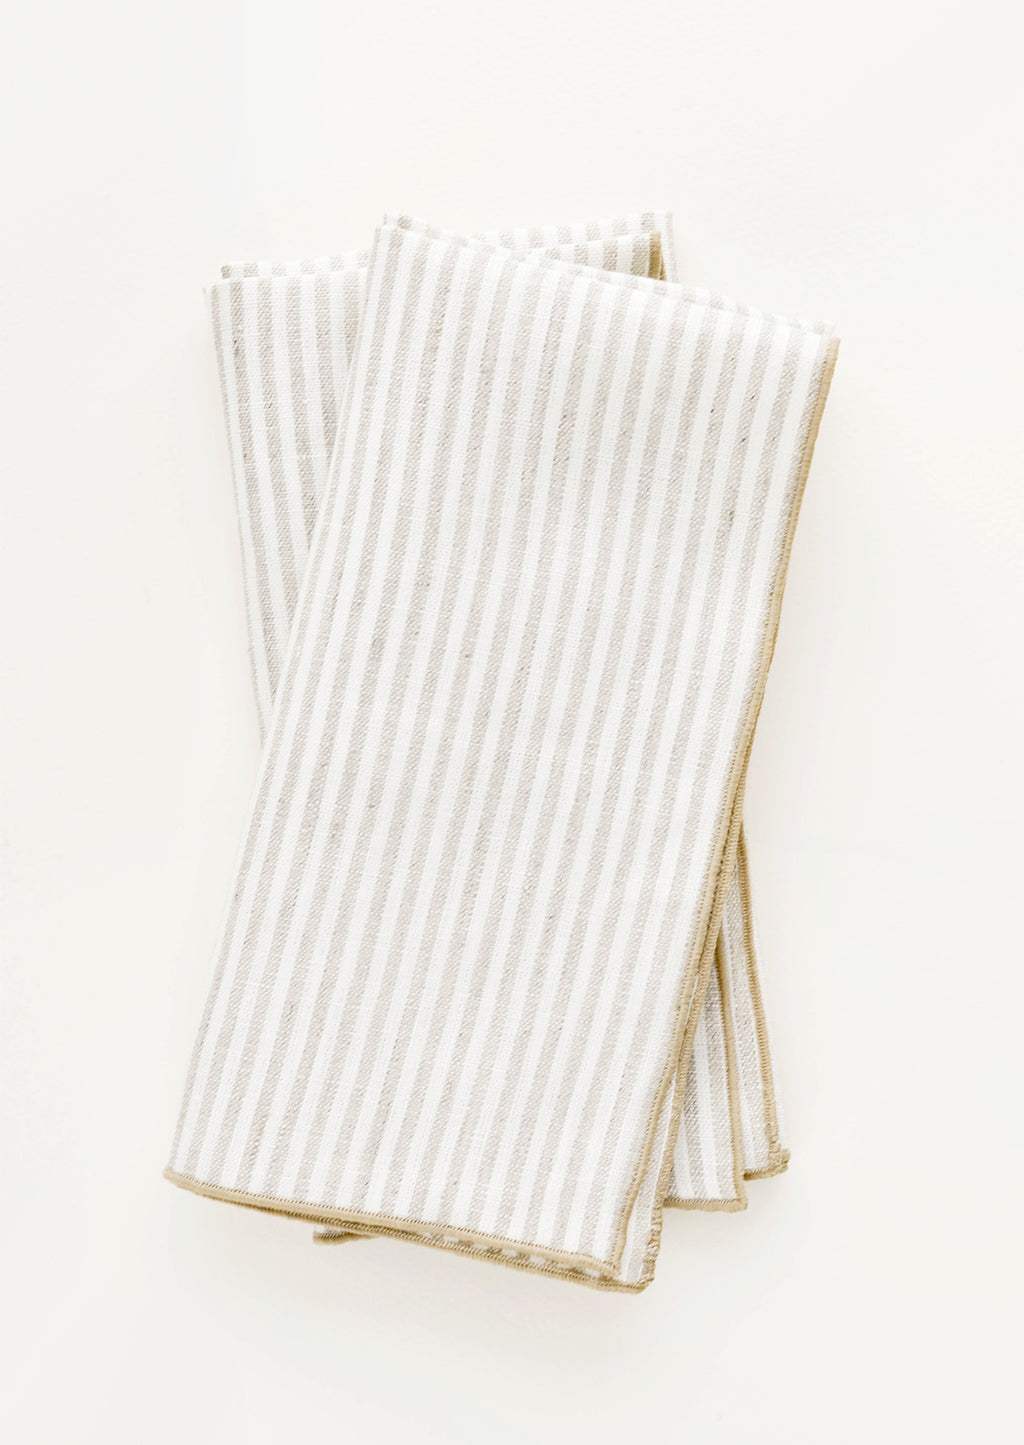 Flax Stripe: Pair of ivory folded Linen Napkins with light brown vertical stripe.